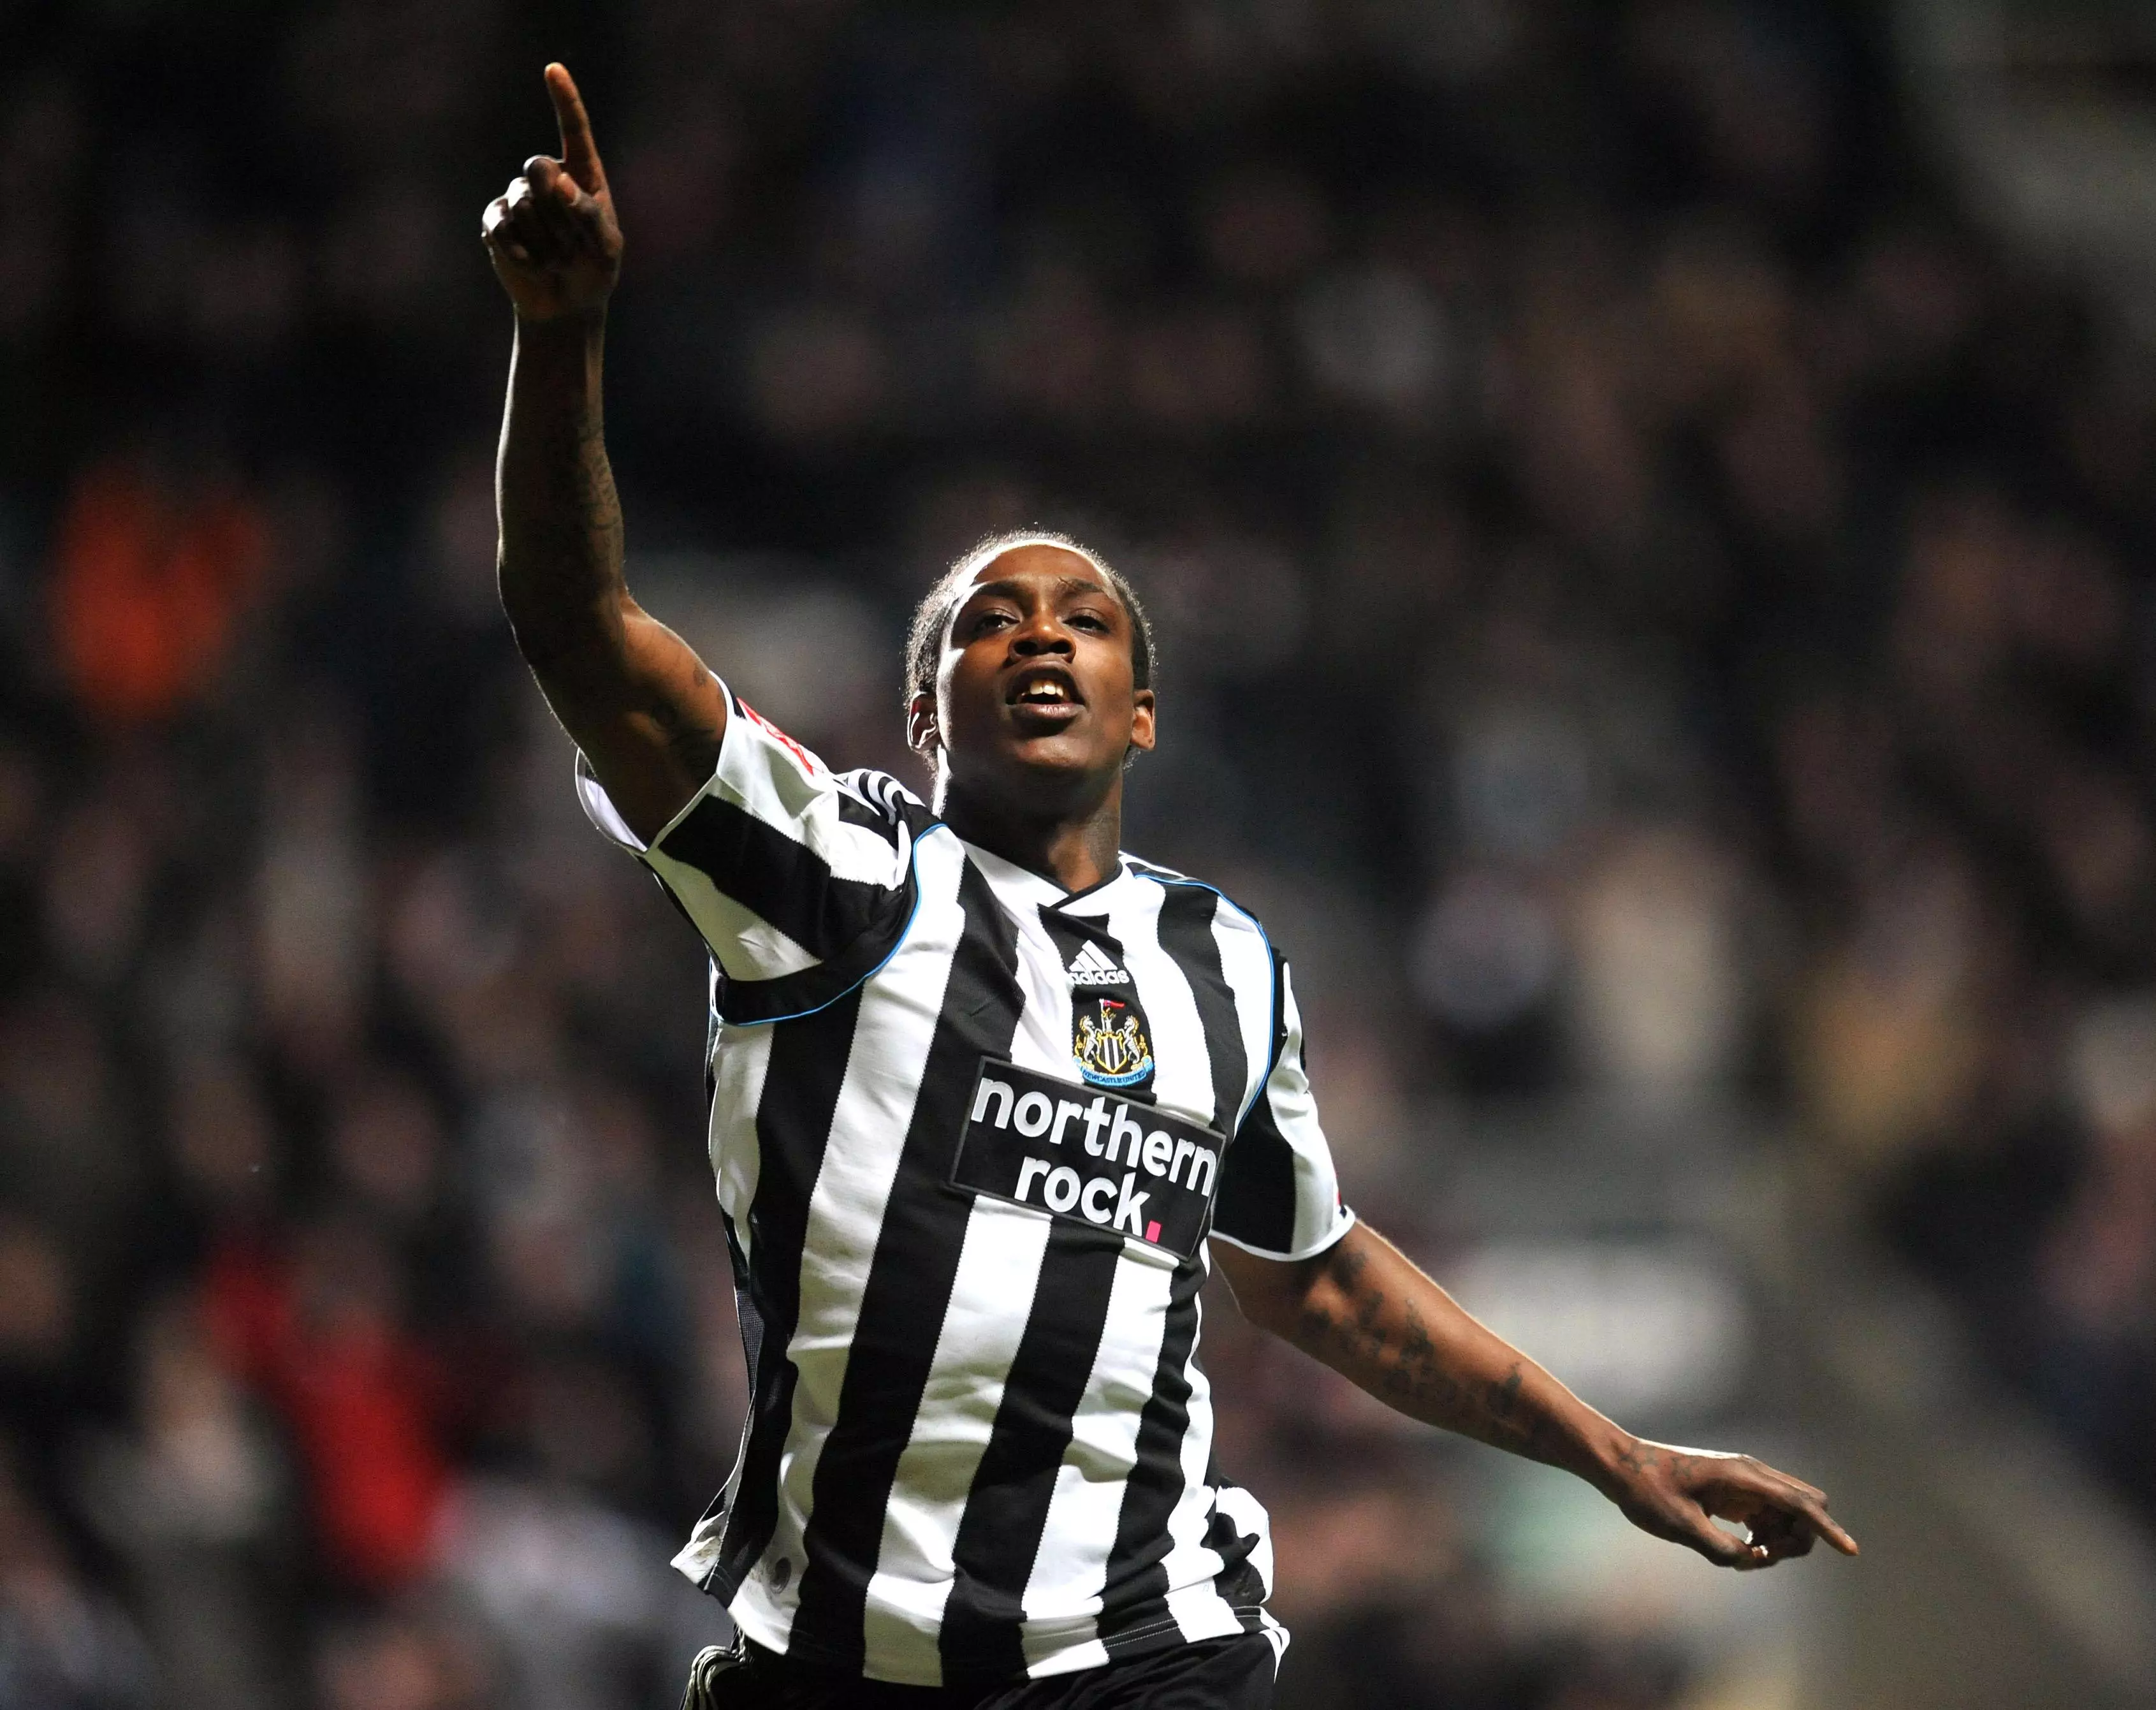 Ranger celebrating for Newcastle in the Championship. Image: PA Images